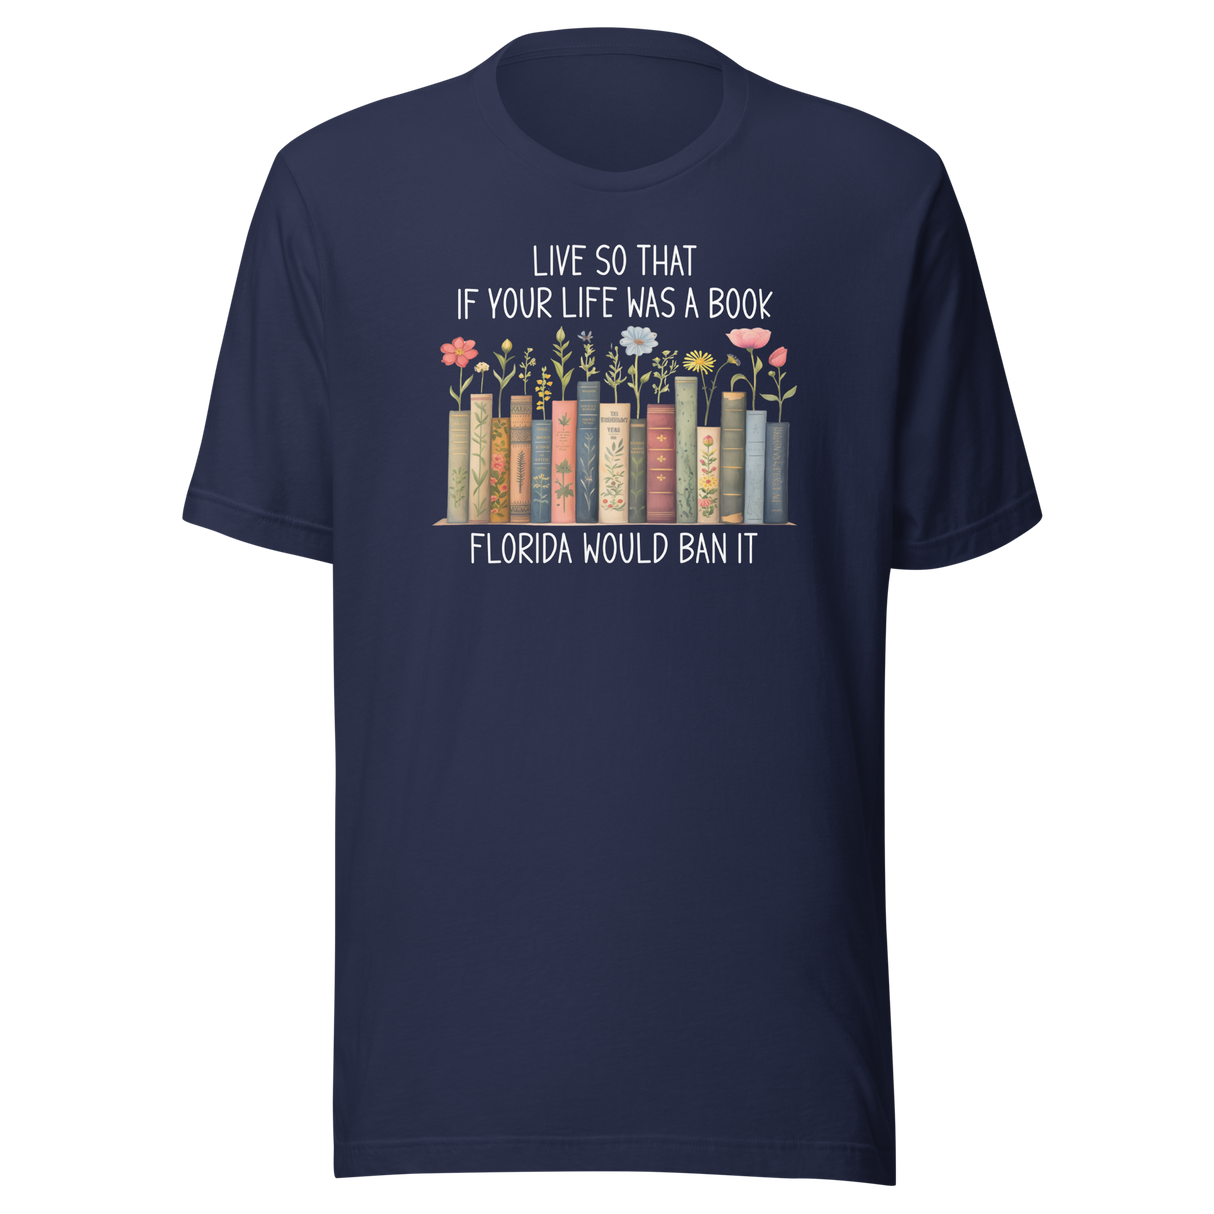 live-so-that-if-your-life-was-a-book-florida-would-ban-it-politics-tee-life-t-shirt-politics-tee-ban-t-shirt-satire-tee#color_navy